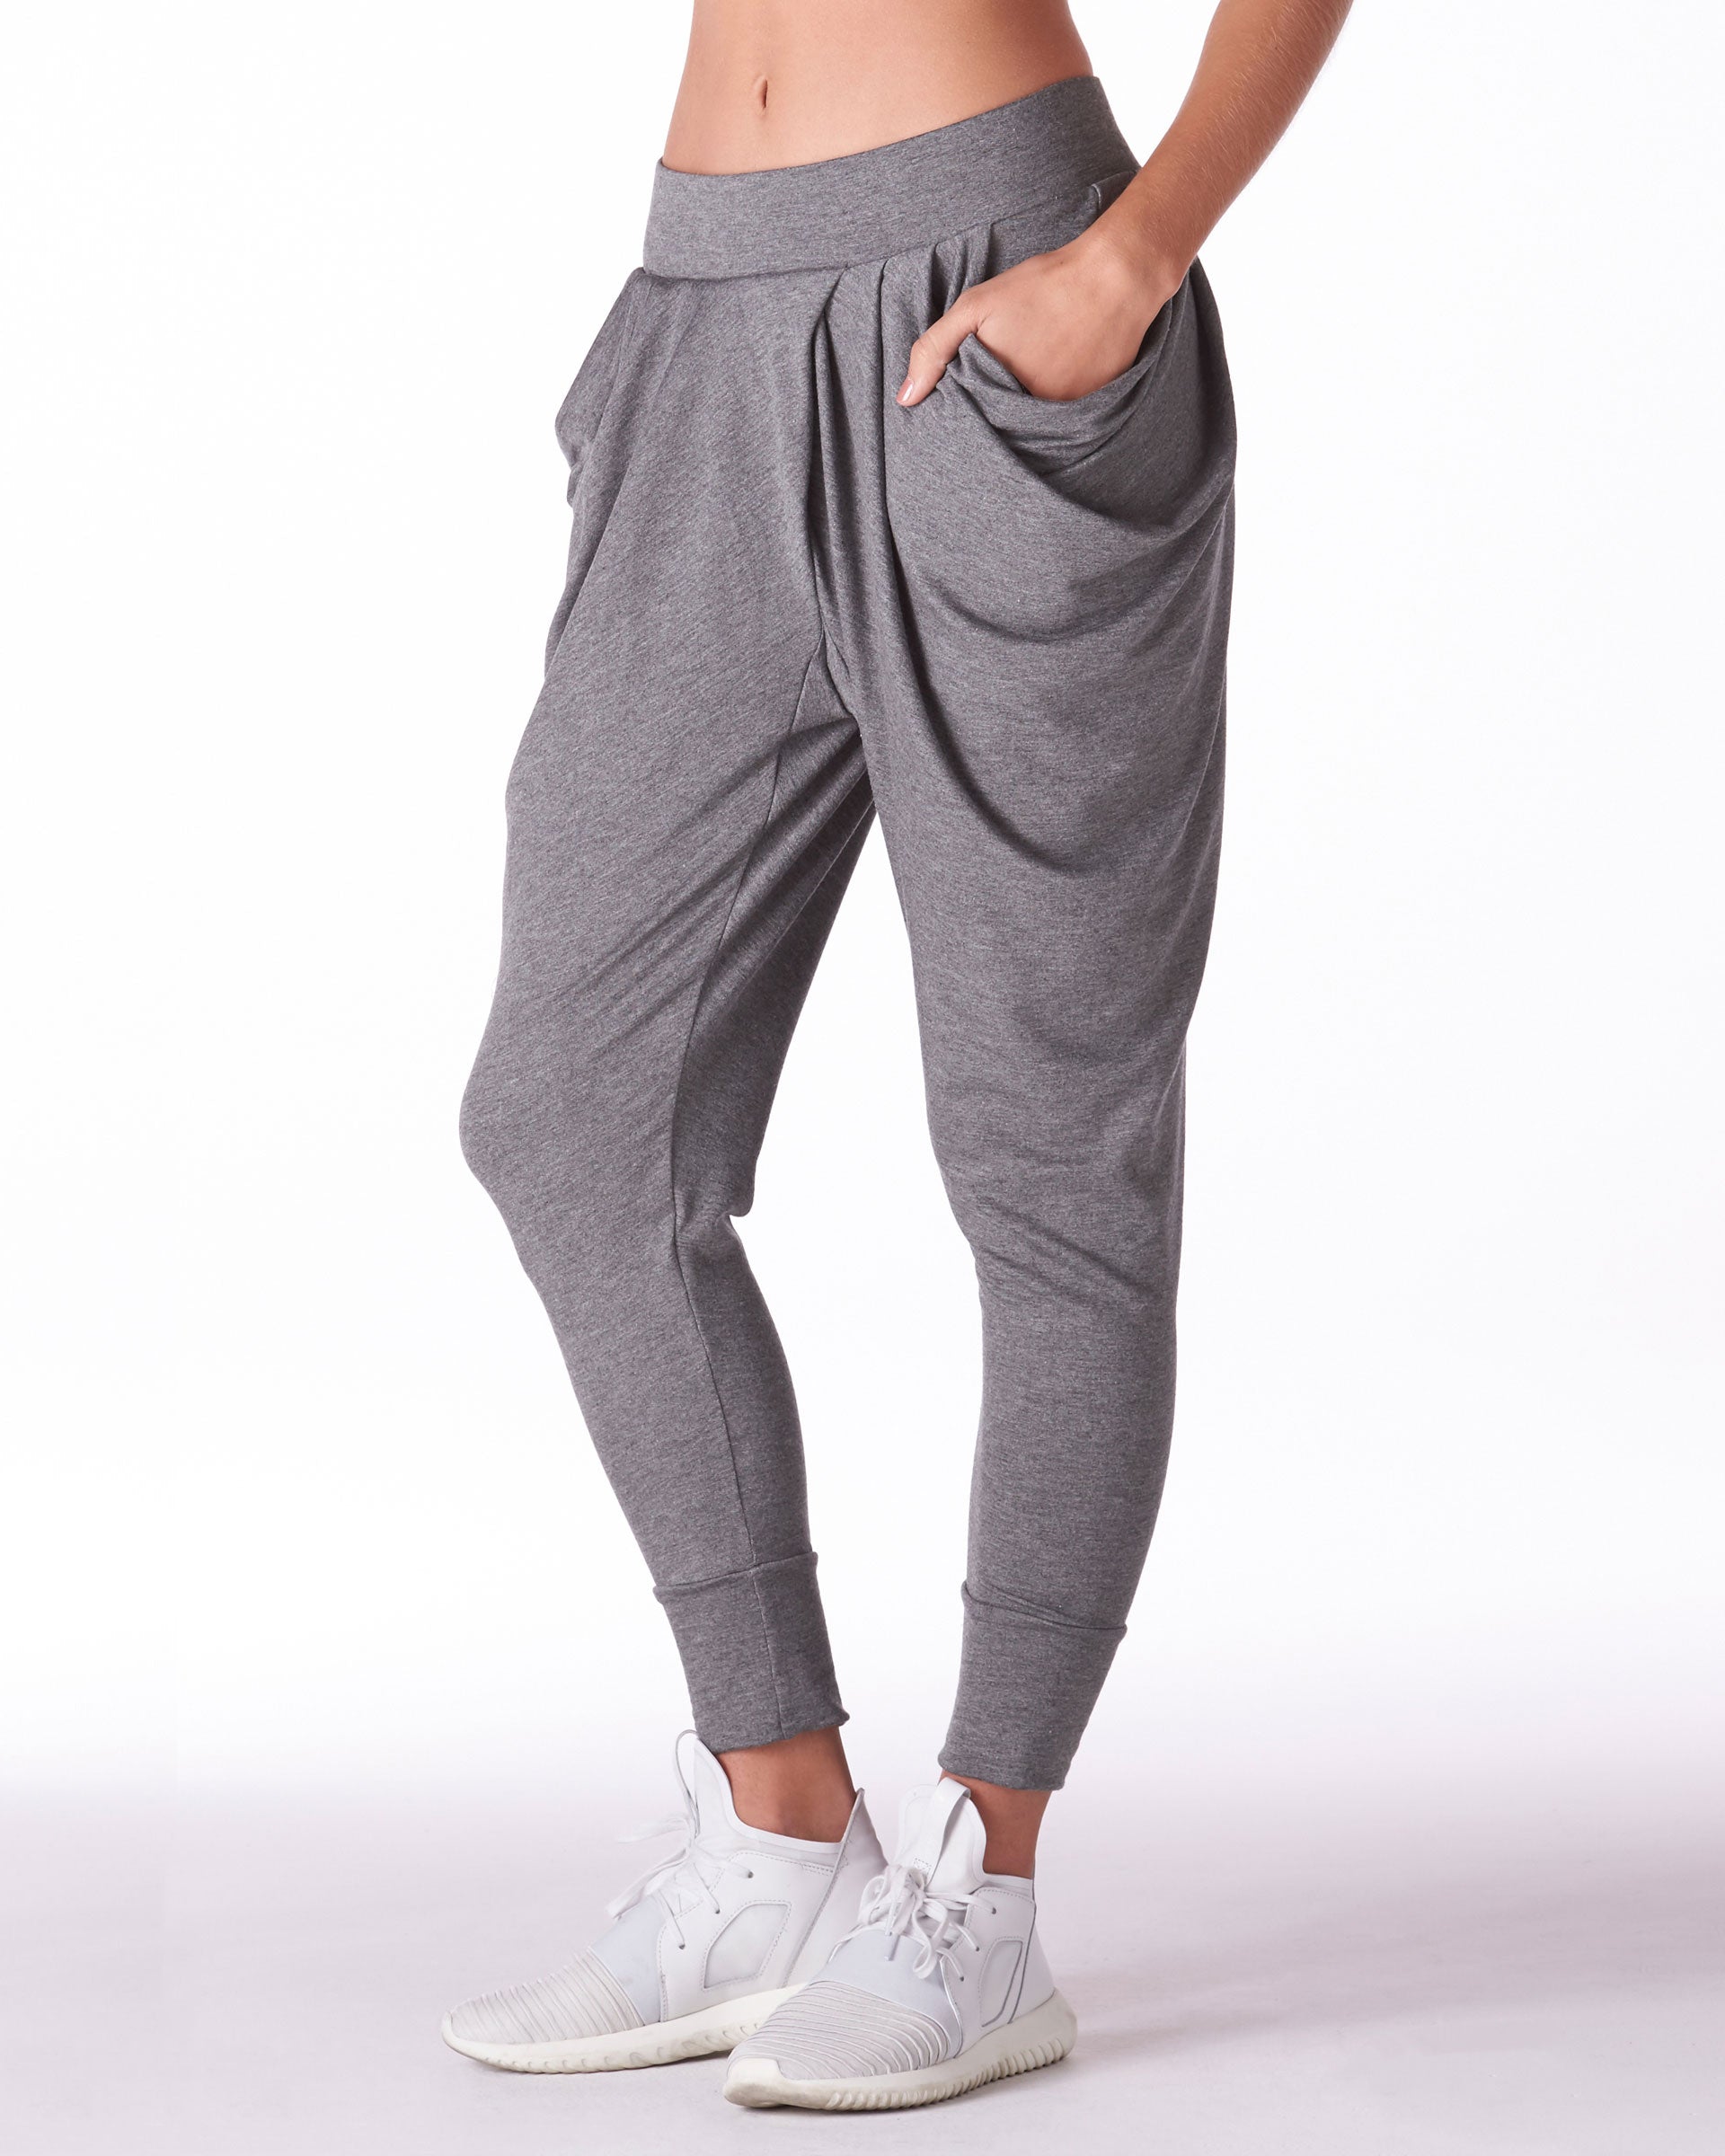 Shop the Imperial Harem Pant | High-fashion activewear MICHI